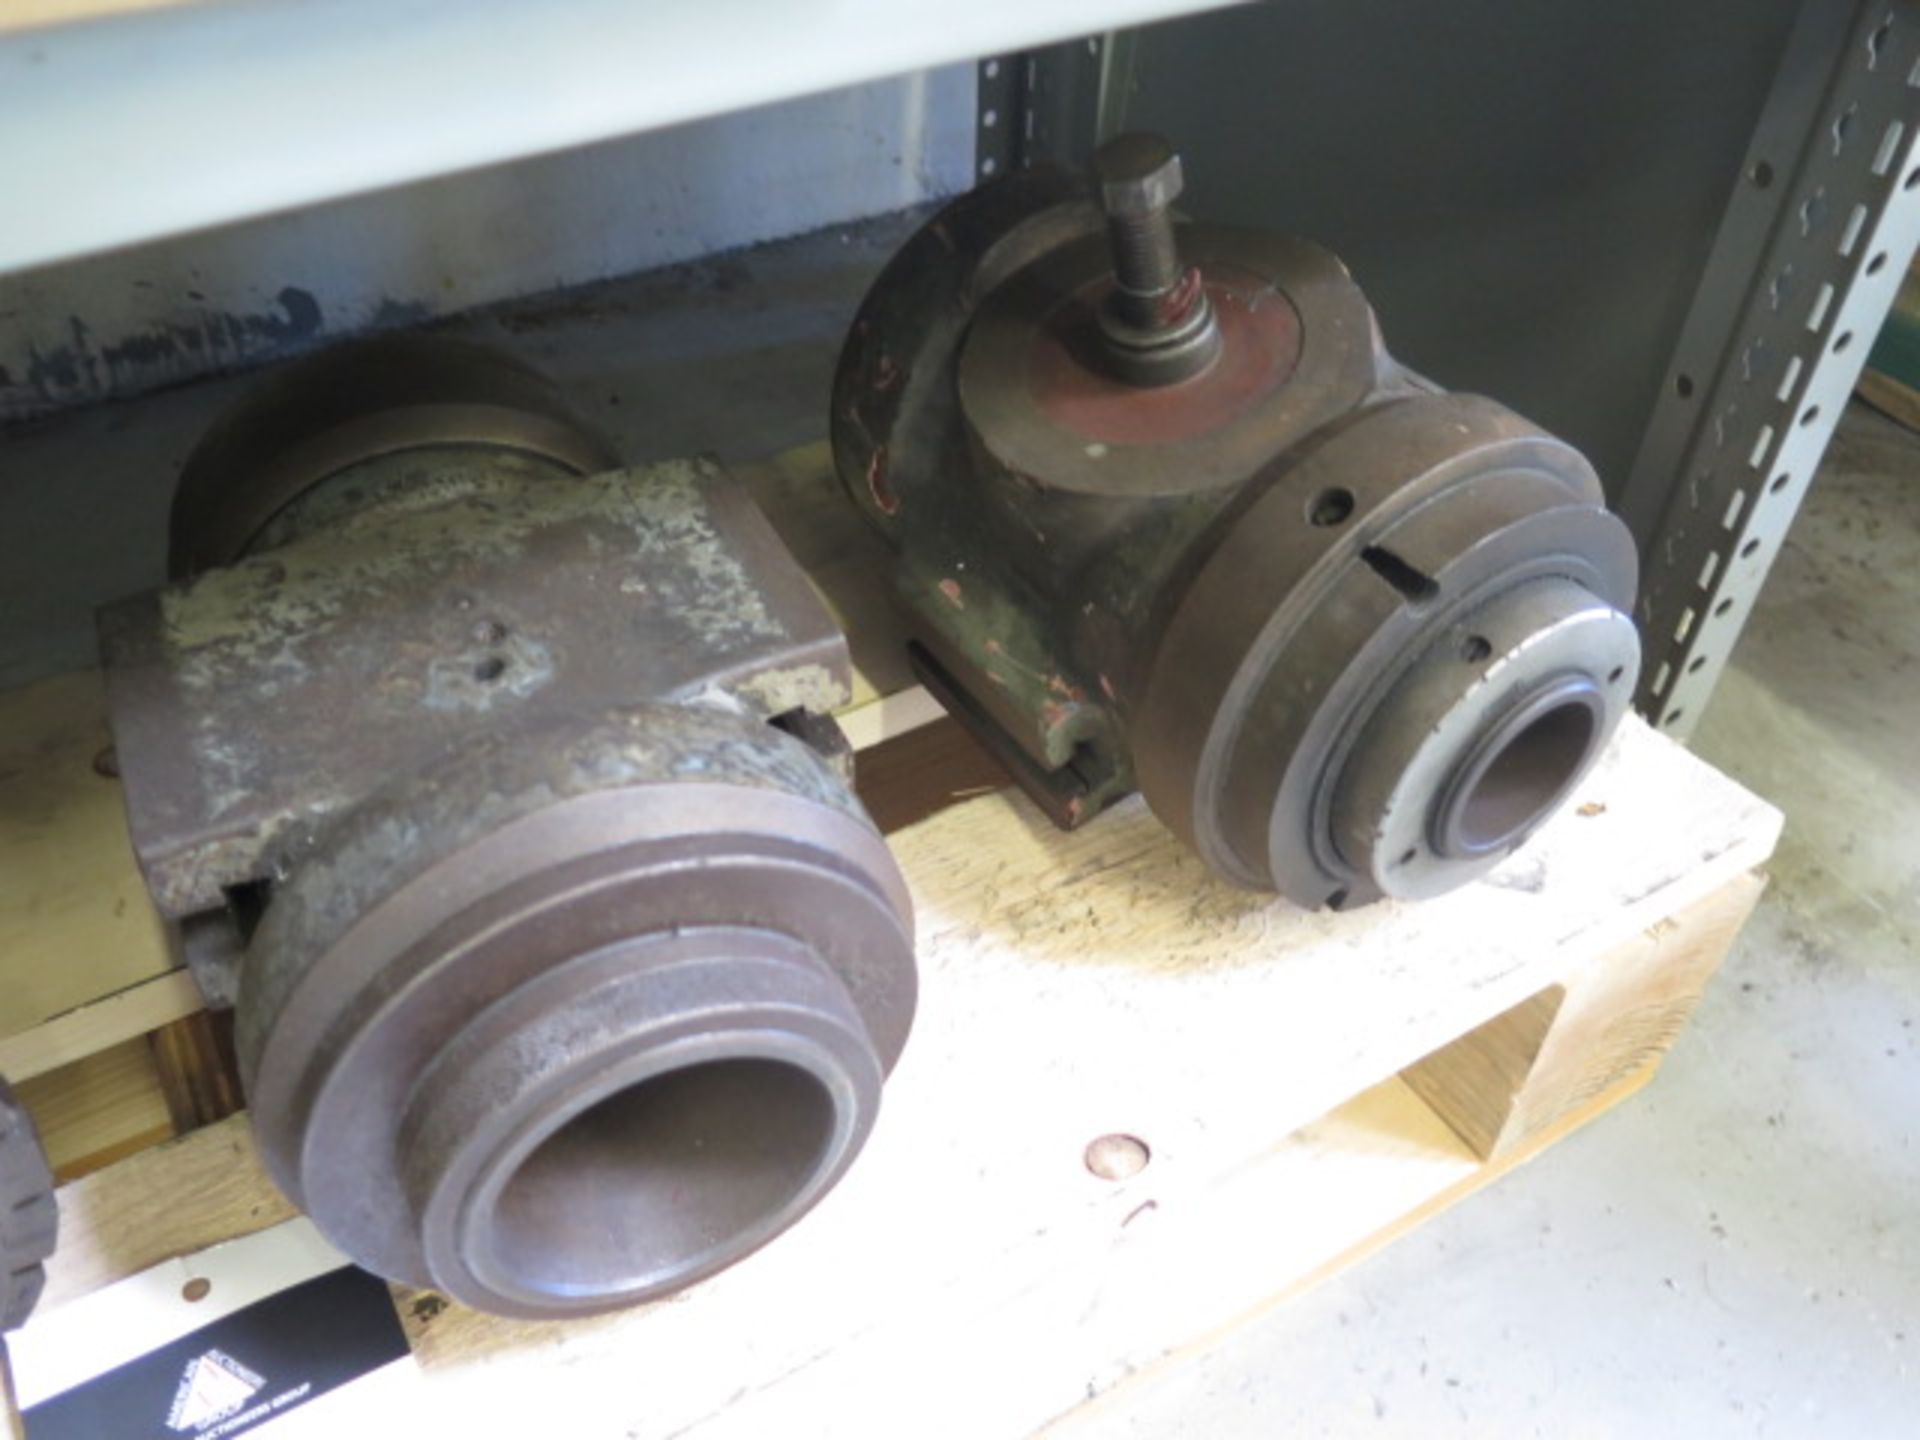 Indexing Grinder Attachments - Image 3 of 3